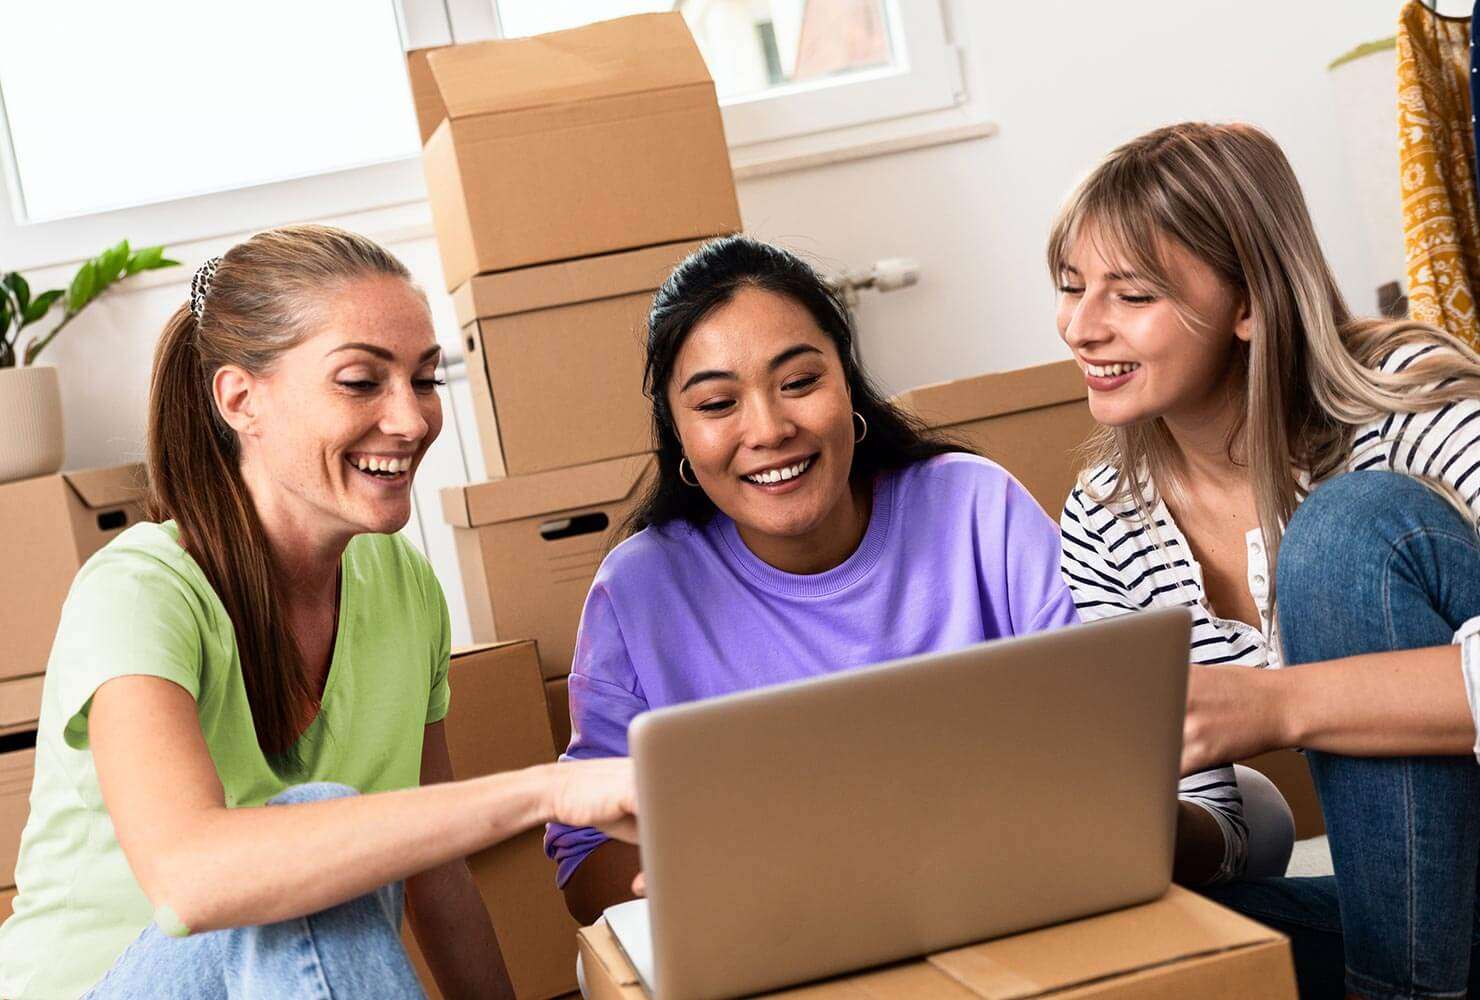 Three women set up WiFi at a new apartment using a laptop sitting on moving boxes